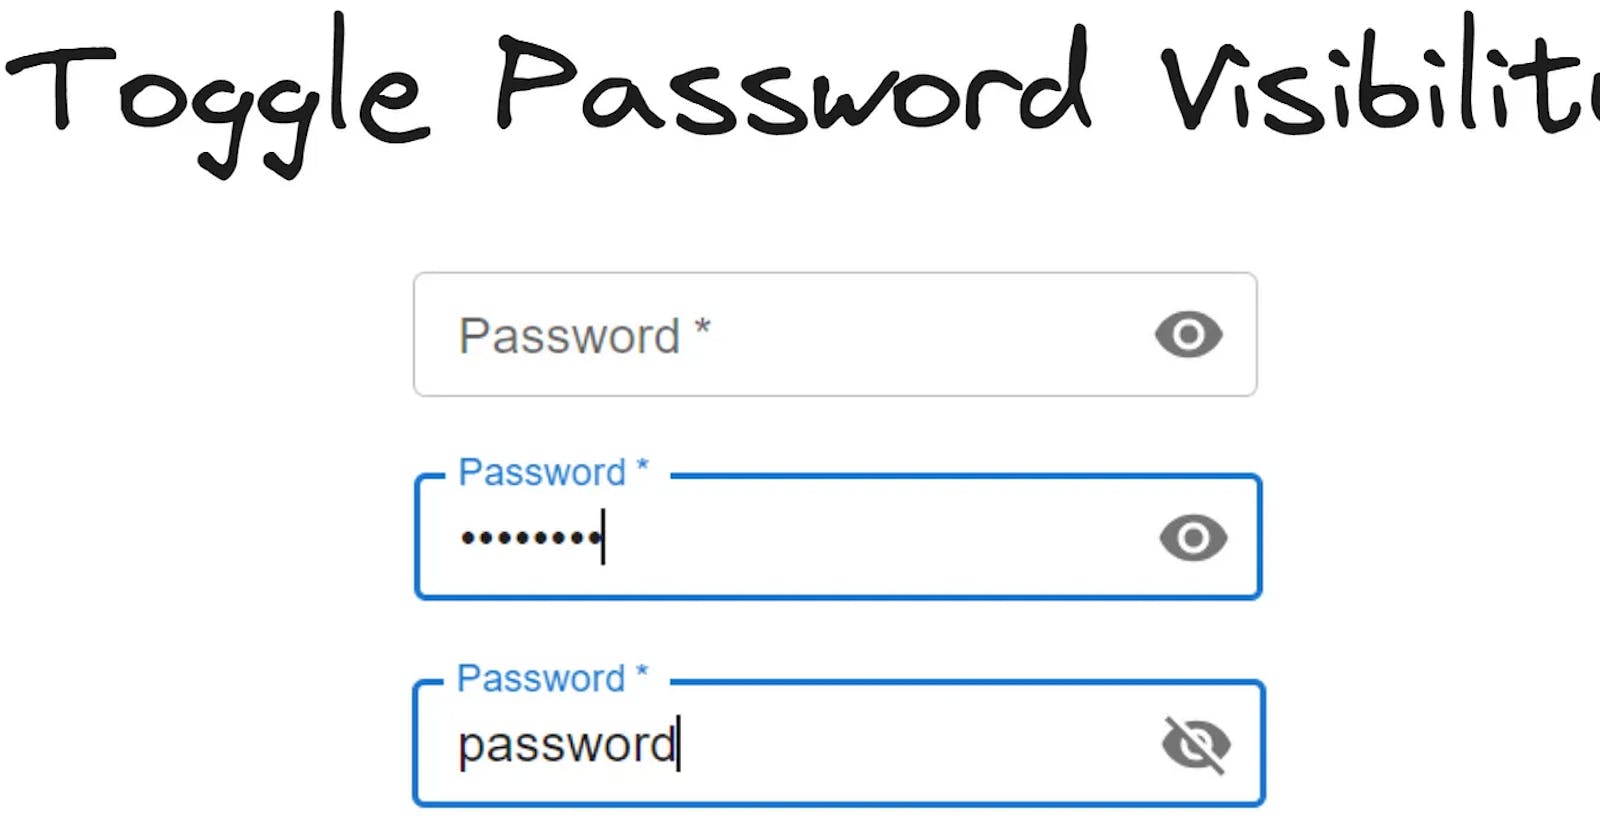 How I Created Toggle Password Visibility with Material UI